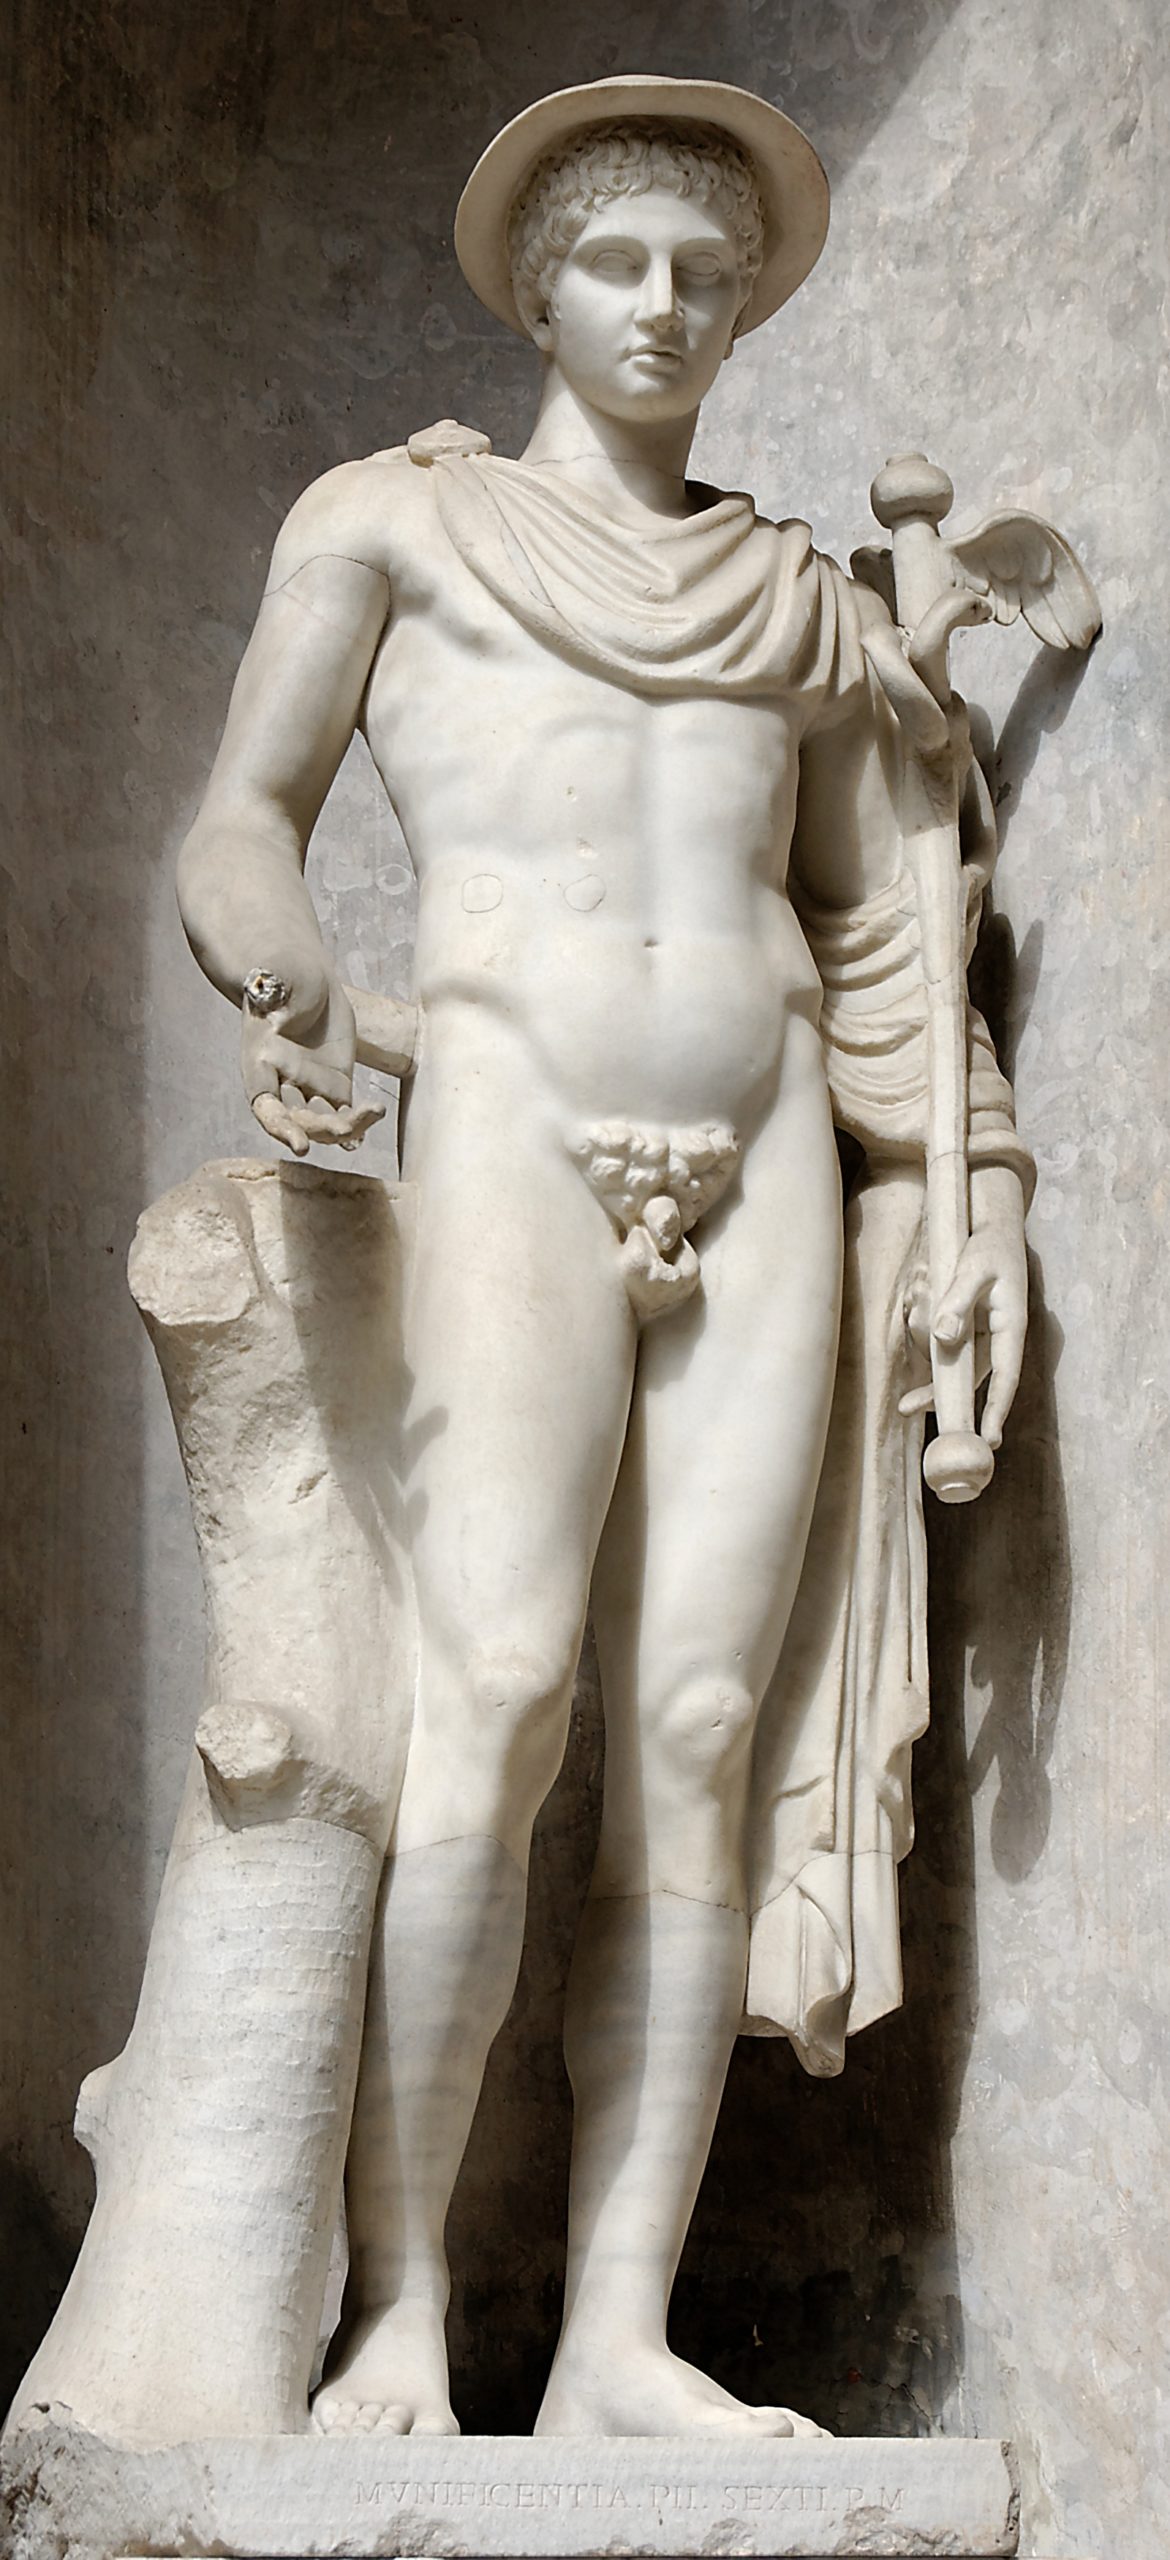 Hermes as a young man. He is naked except for a chlamys cloak draped over his left shoulder, and a petasos hat. He holds a winged sceptre in his left hand.